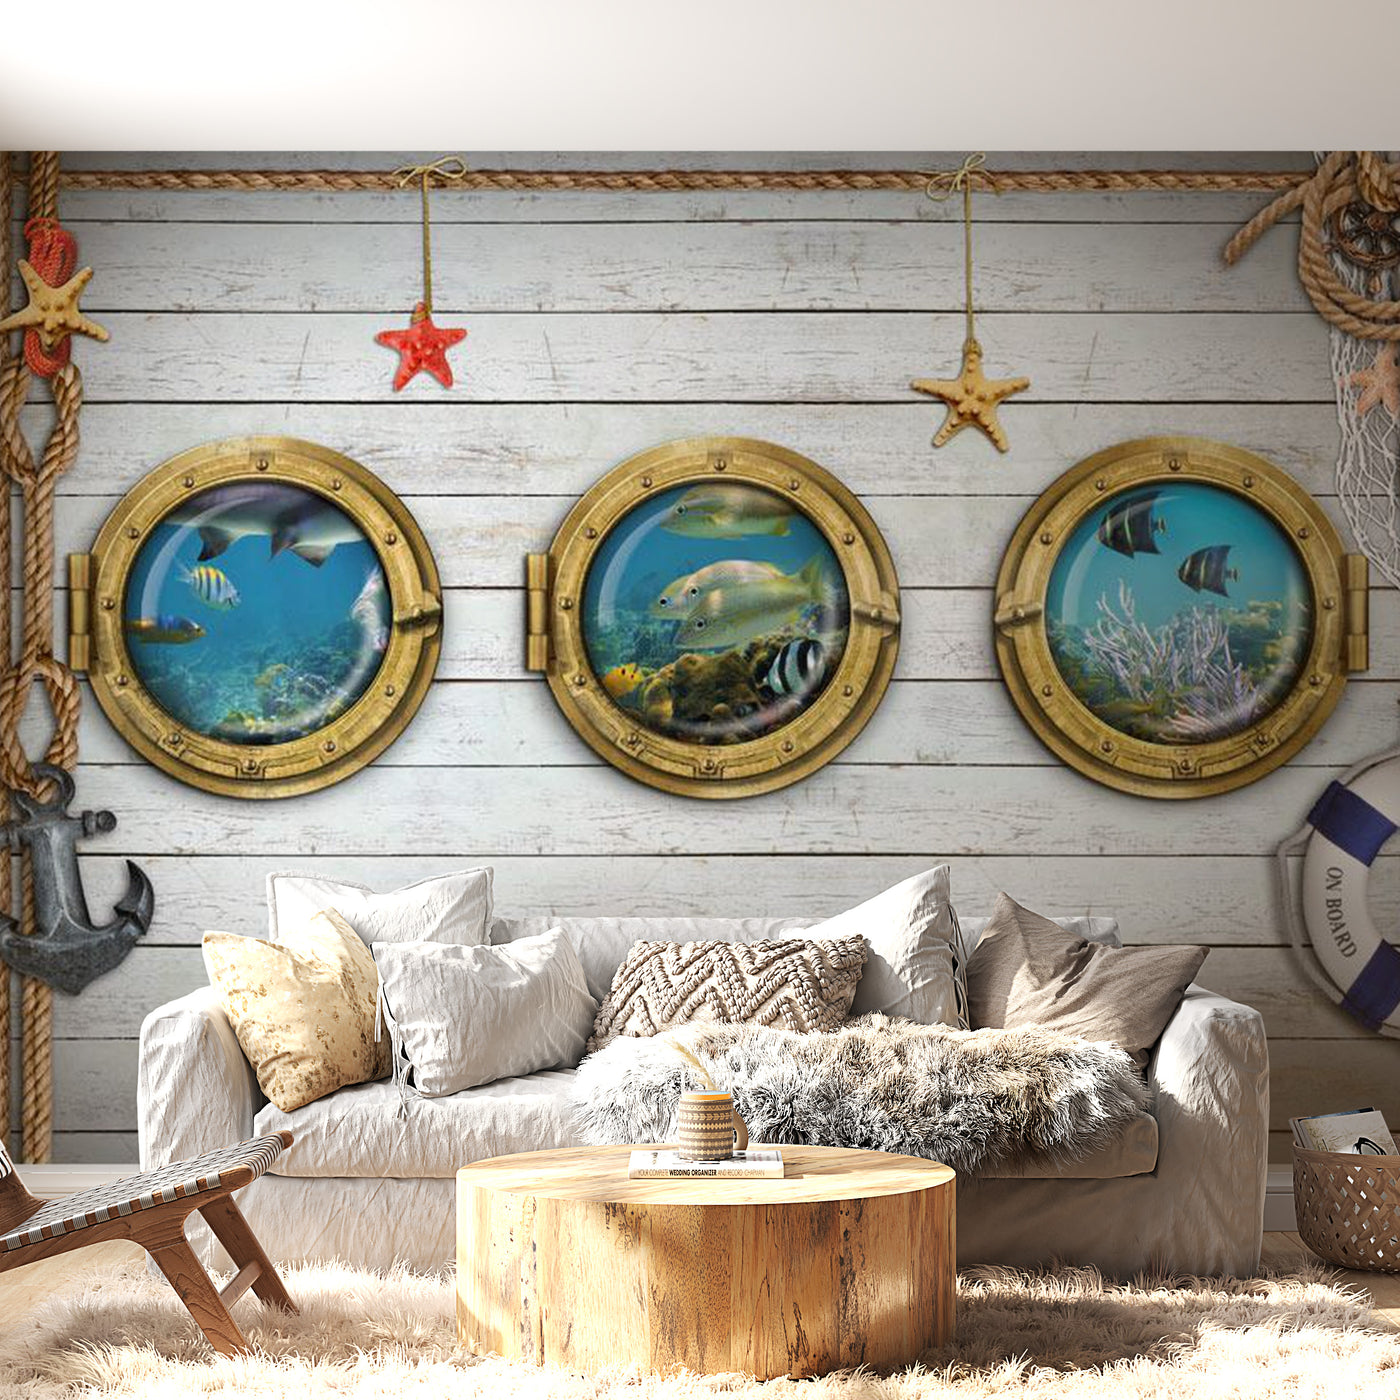 Peel & Stick Animal Wall Mural - Coastal Portholes - Removable Wall Decals